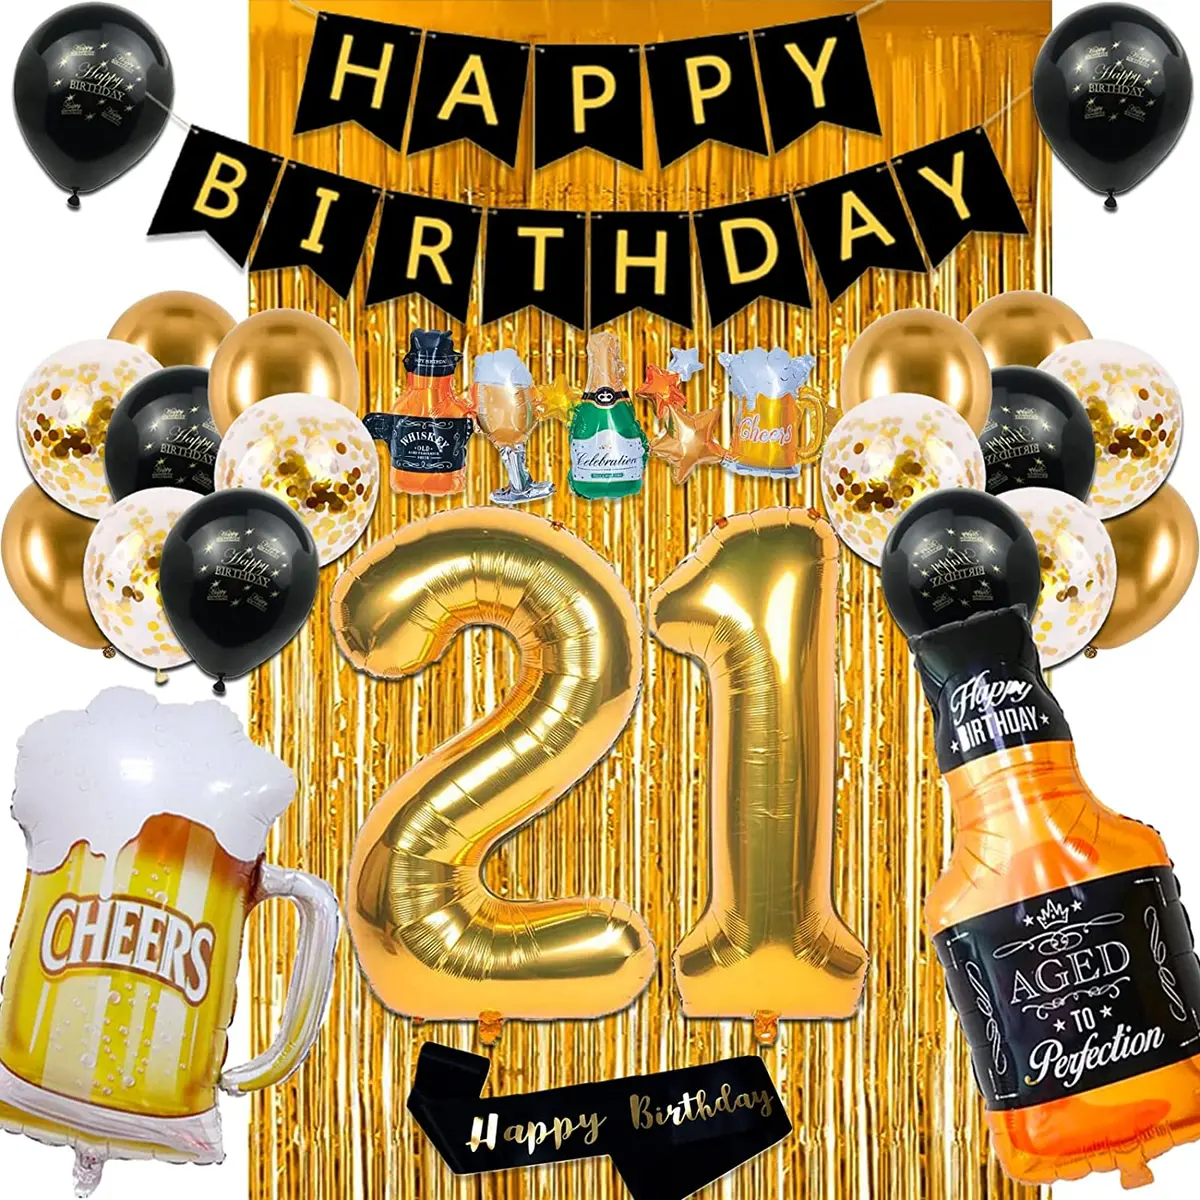 21St Birthday Decorations for Him Her, Black and Gold 21 Birthday Decorations wi